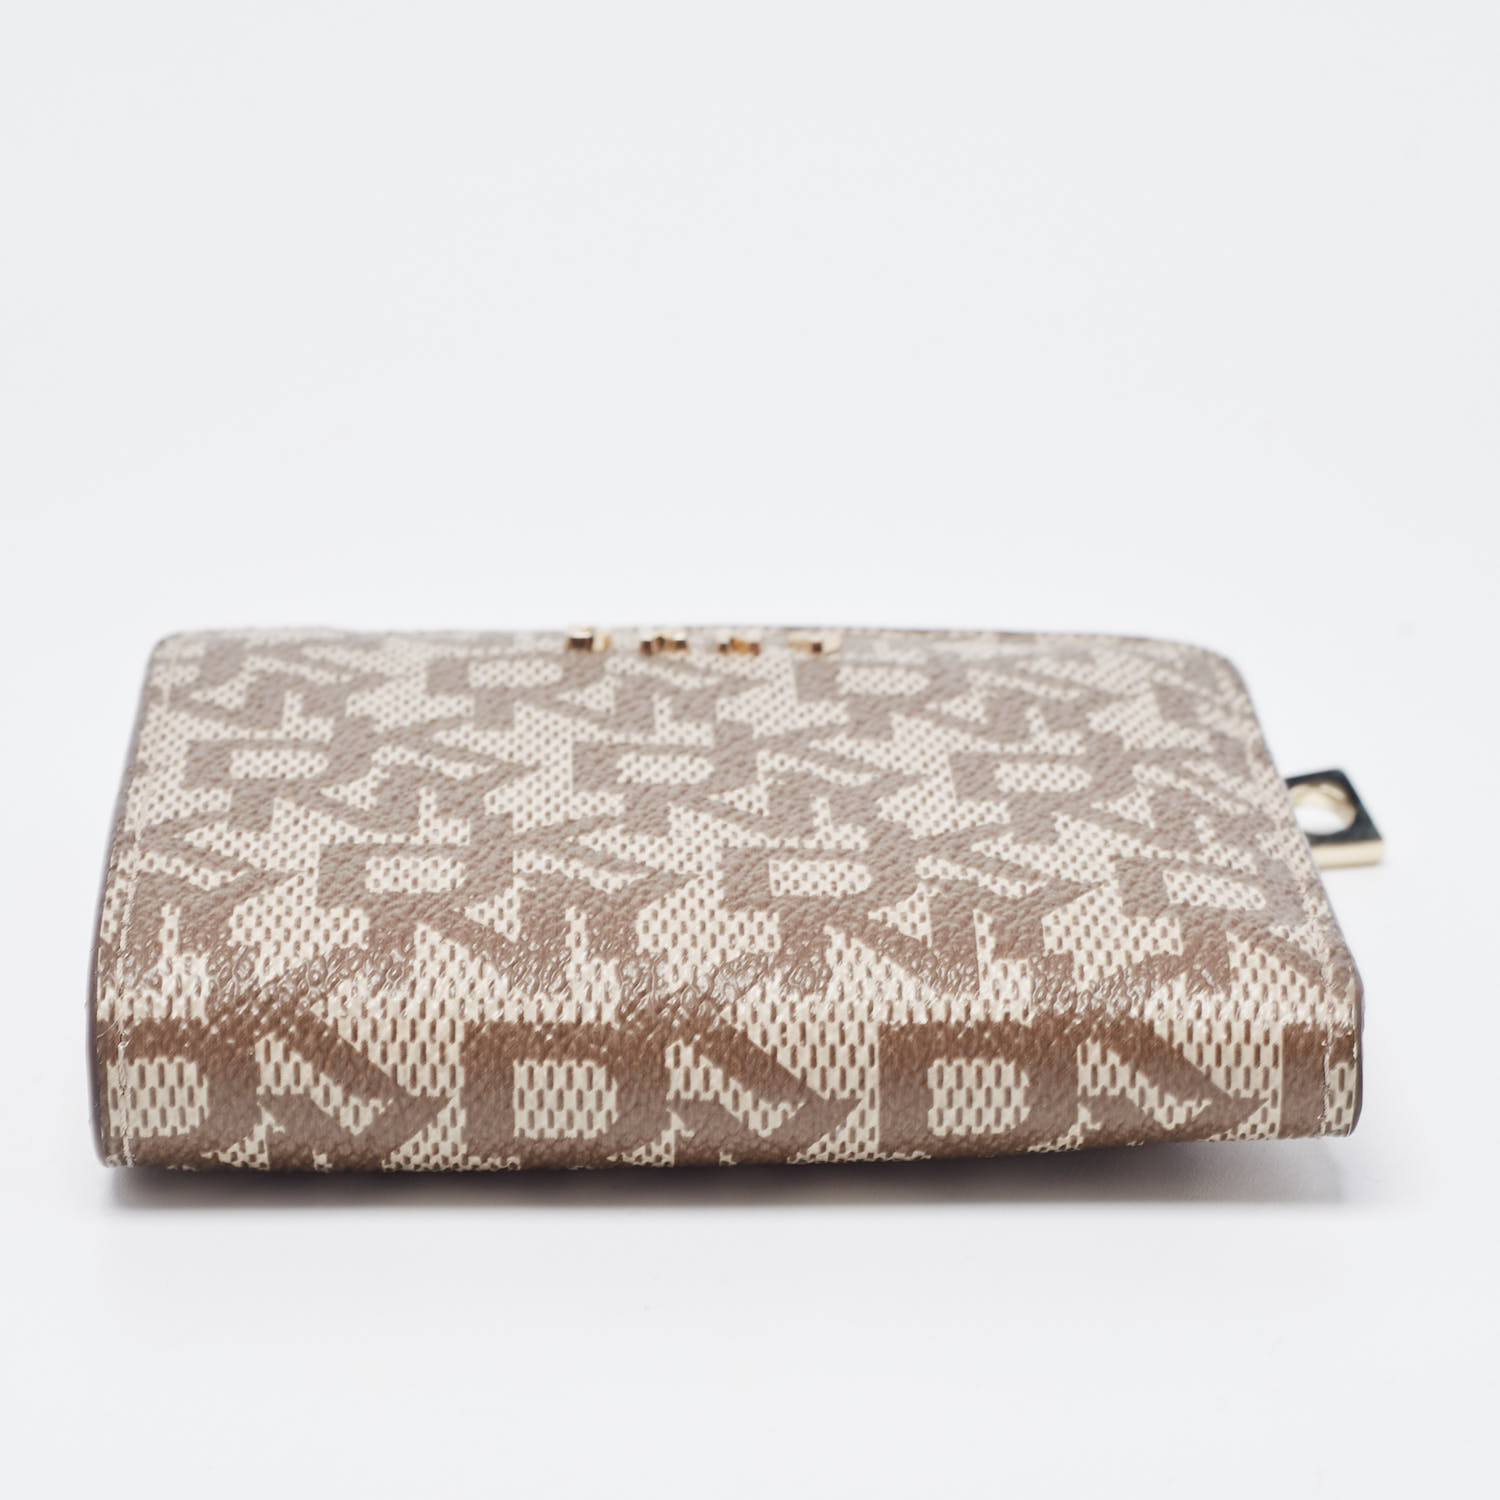 DKNY Beige Signature Coated Canvas Compact Wallet